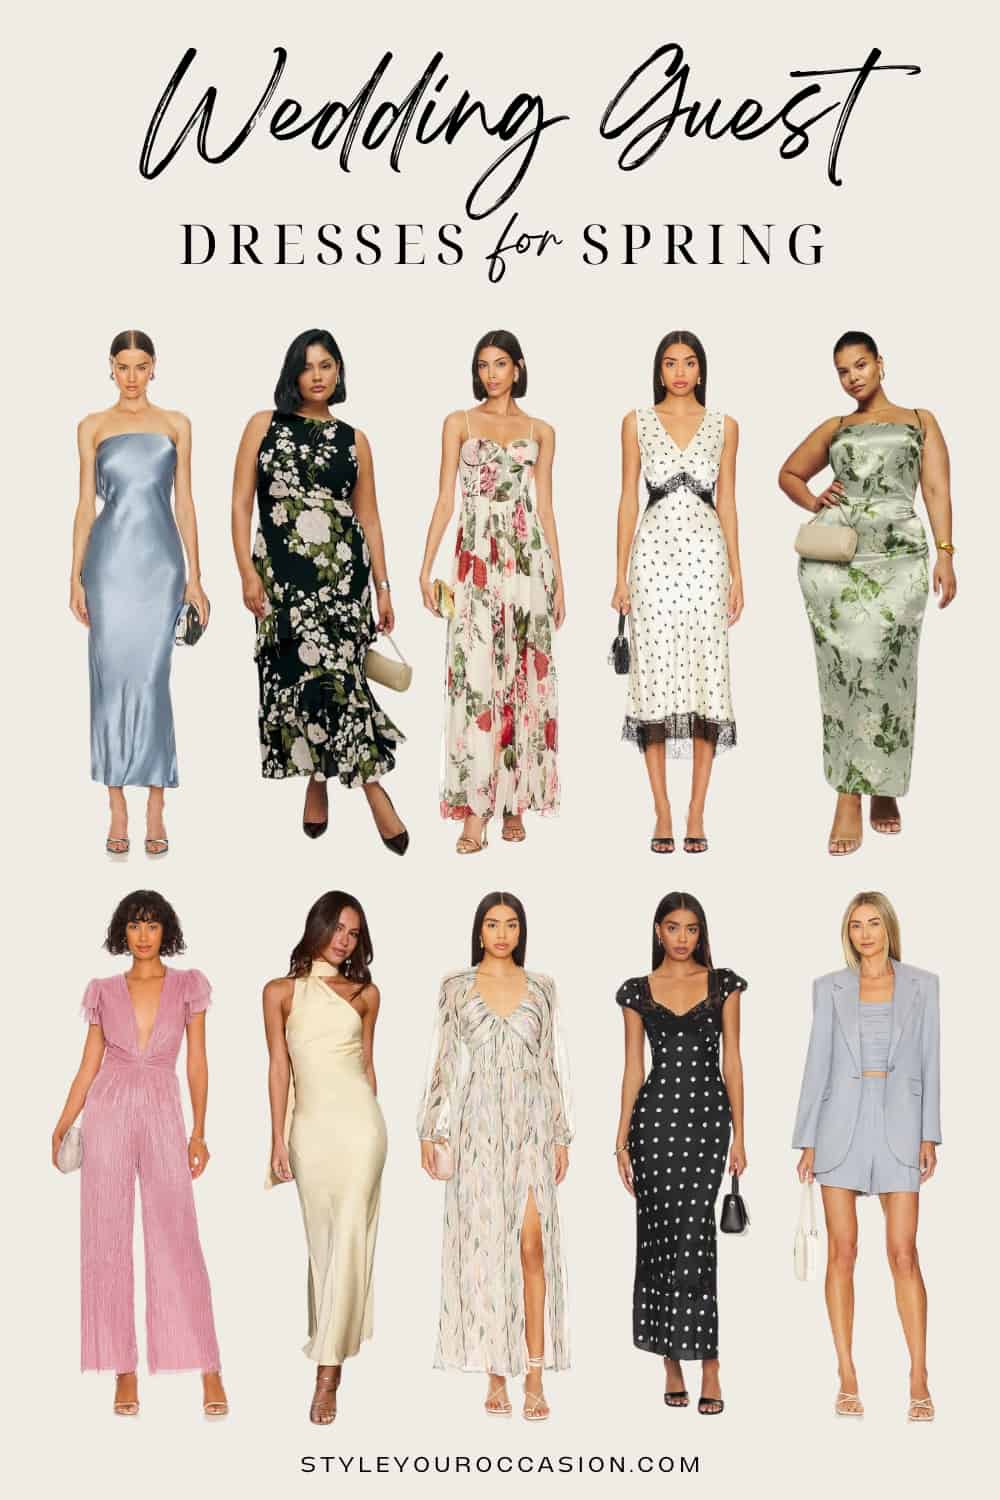 An image board of wedding guests outfits for spring for women including dresses, a jumpsuit, and a dressy short set